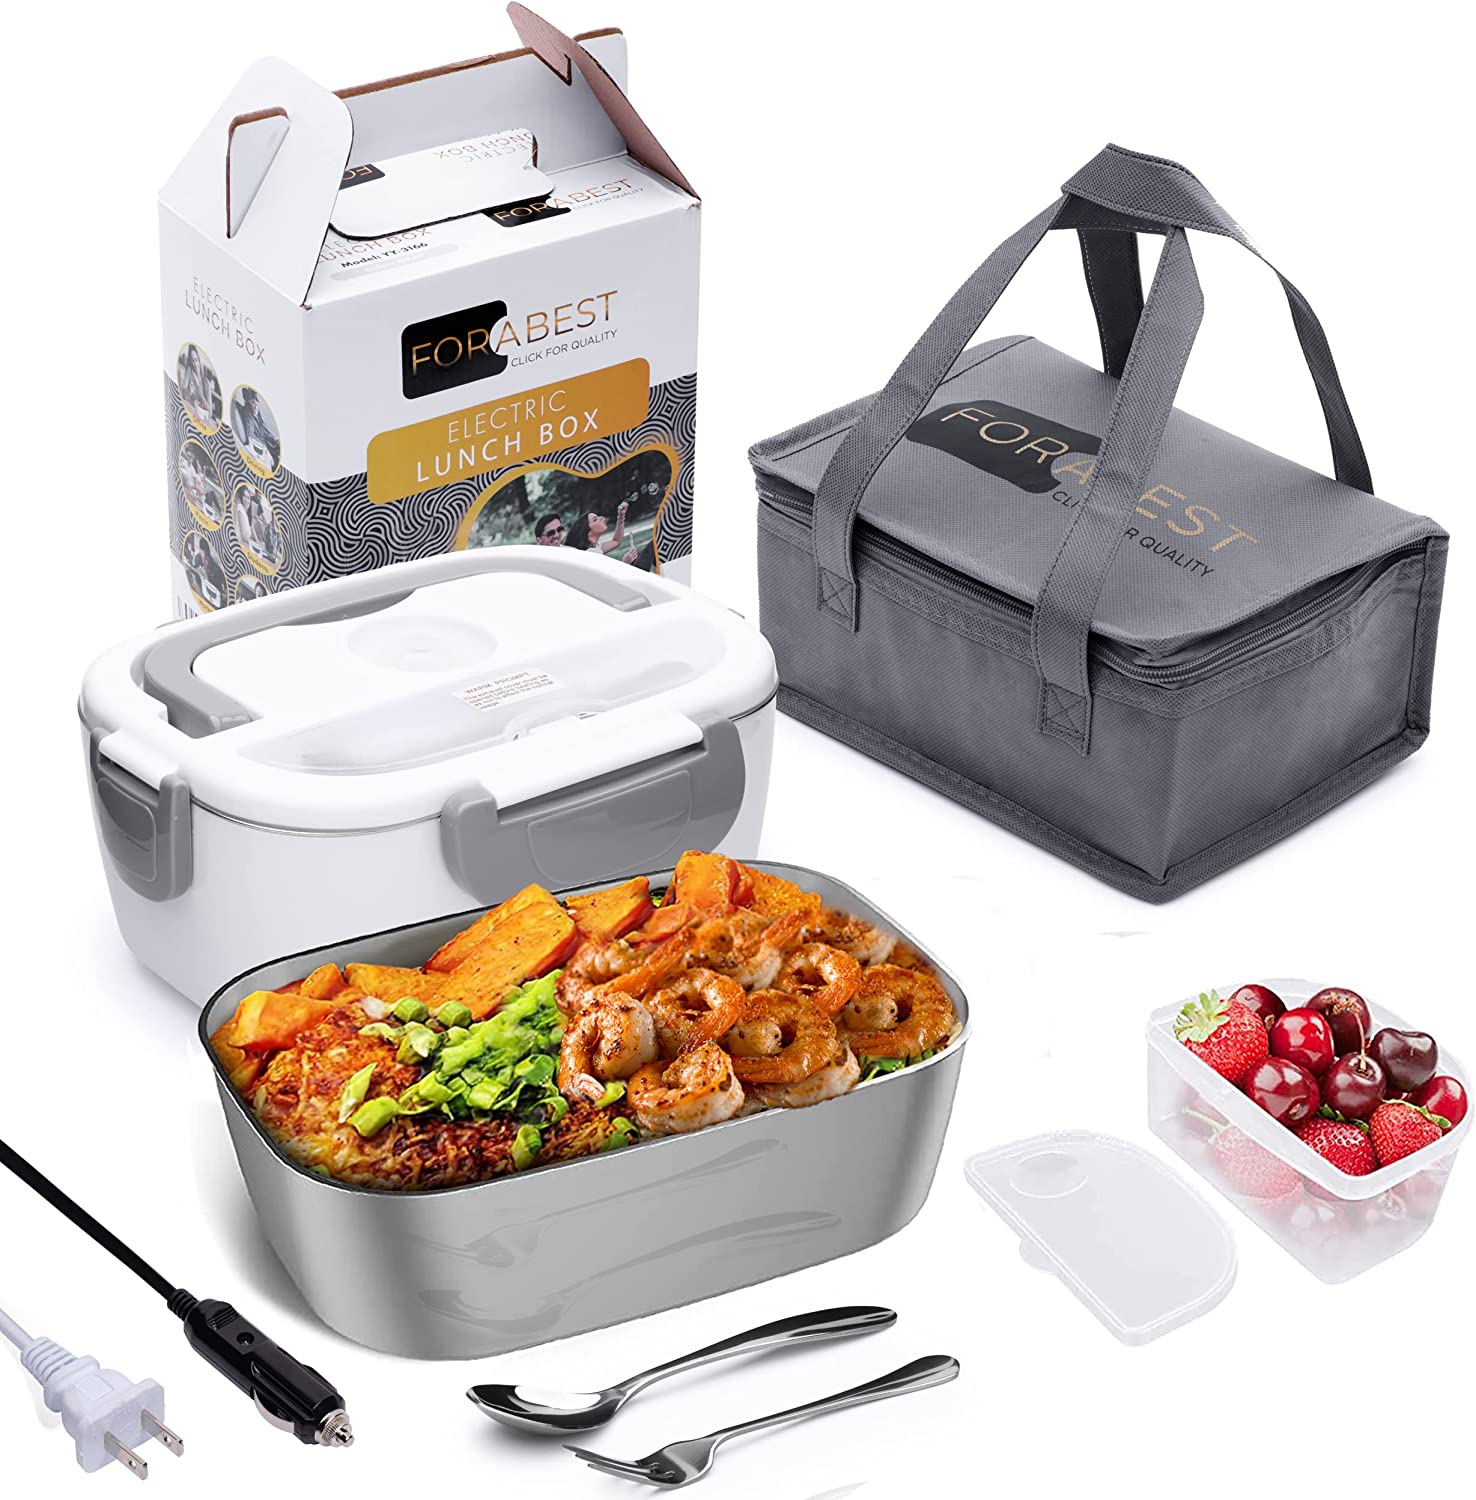 ALL YOU NEED TO KNOW ABOUT AN ELECTRIC LUNCHBOX – Forabest